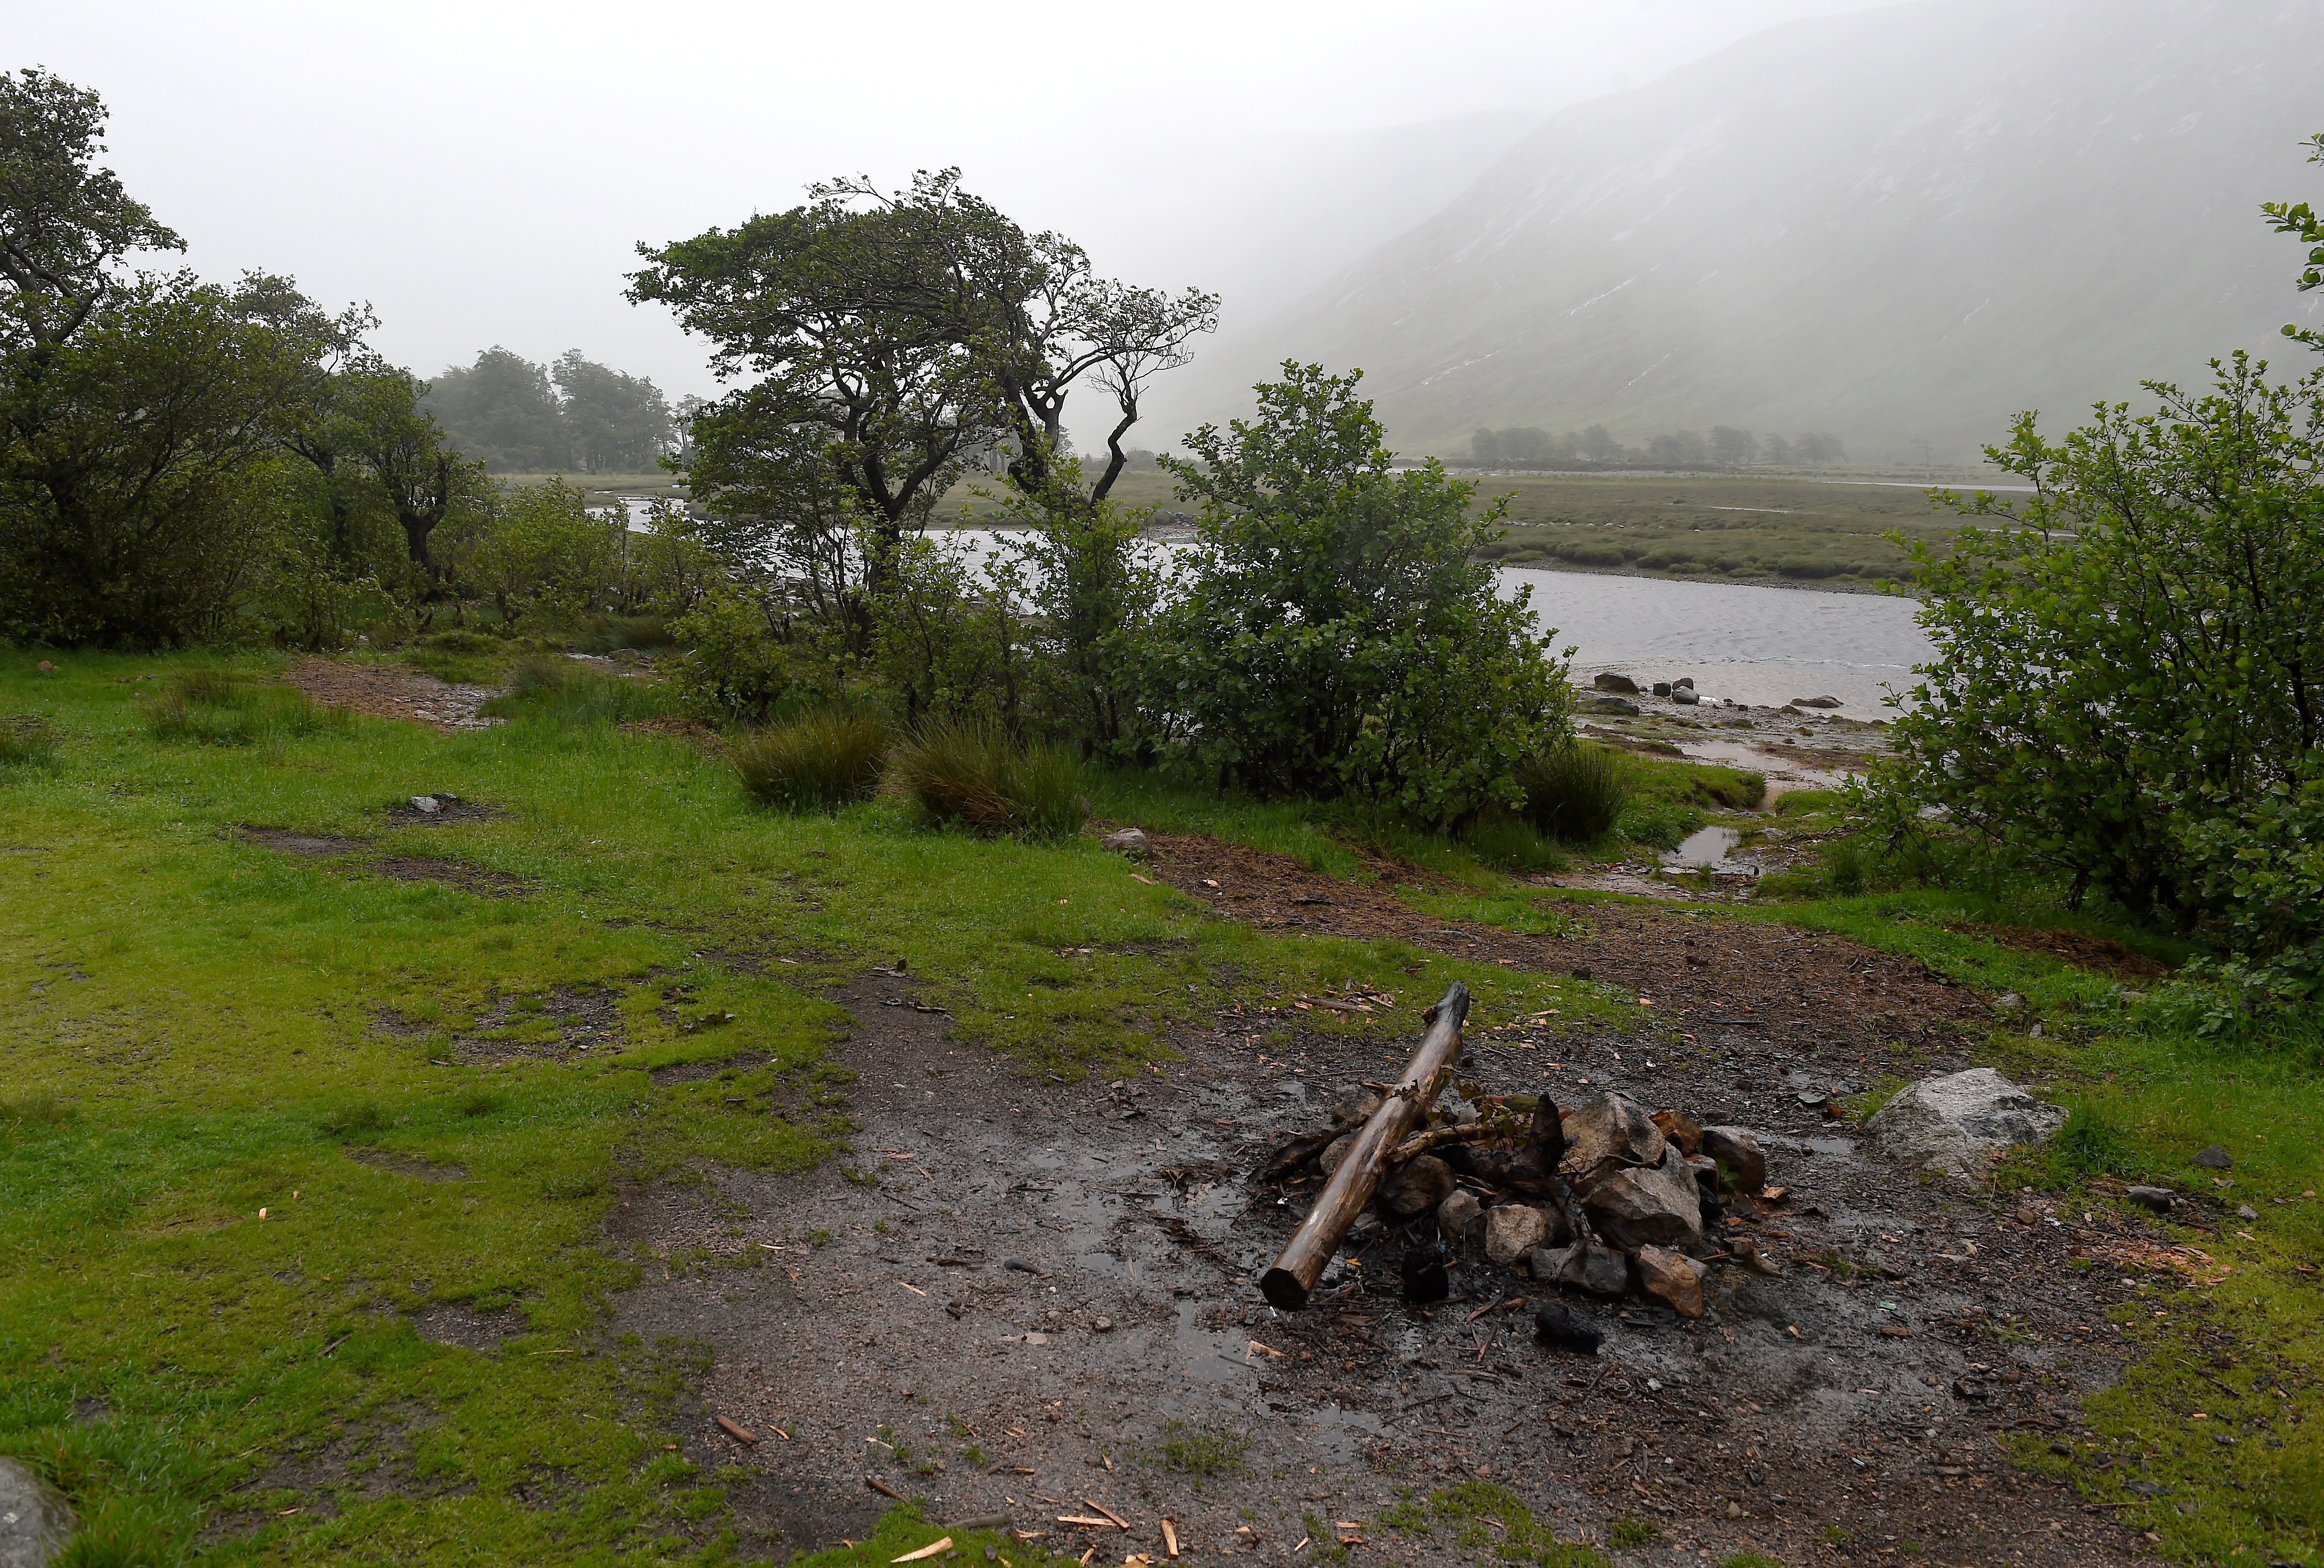 Glen Etive, Lochaber where some wild campers have been causing problems with litter and debris.